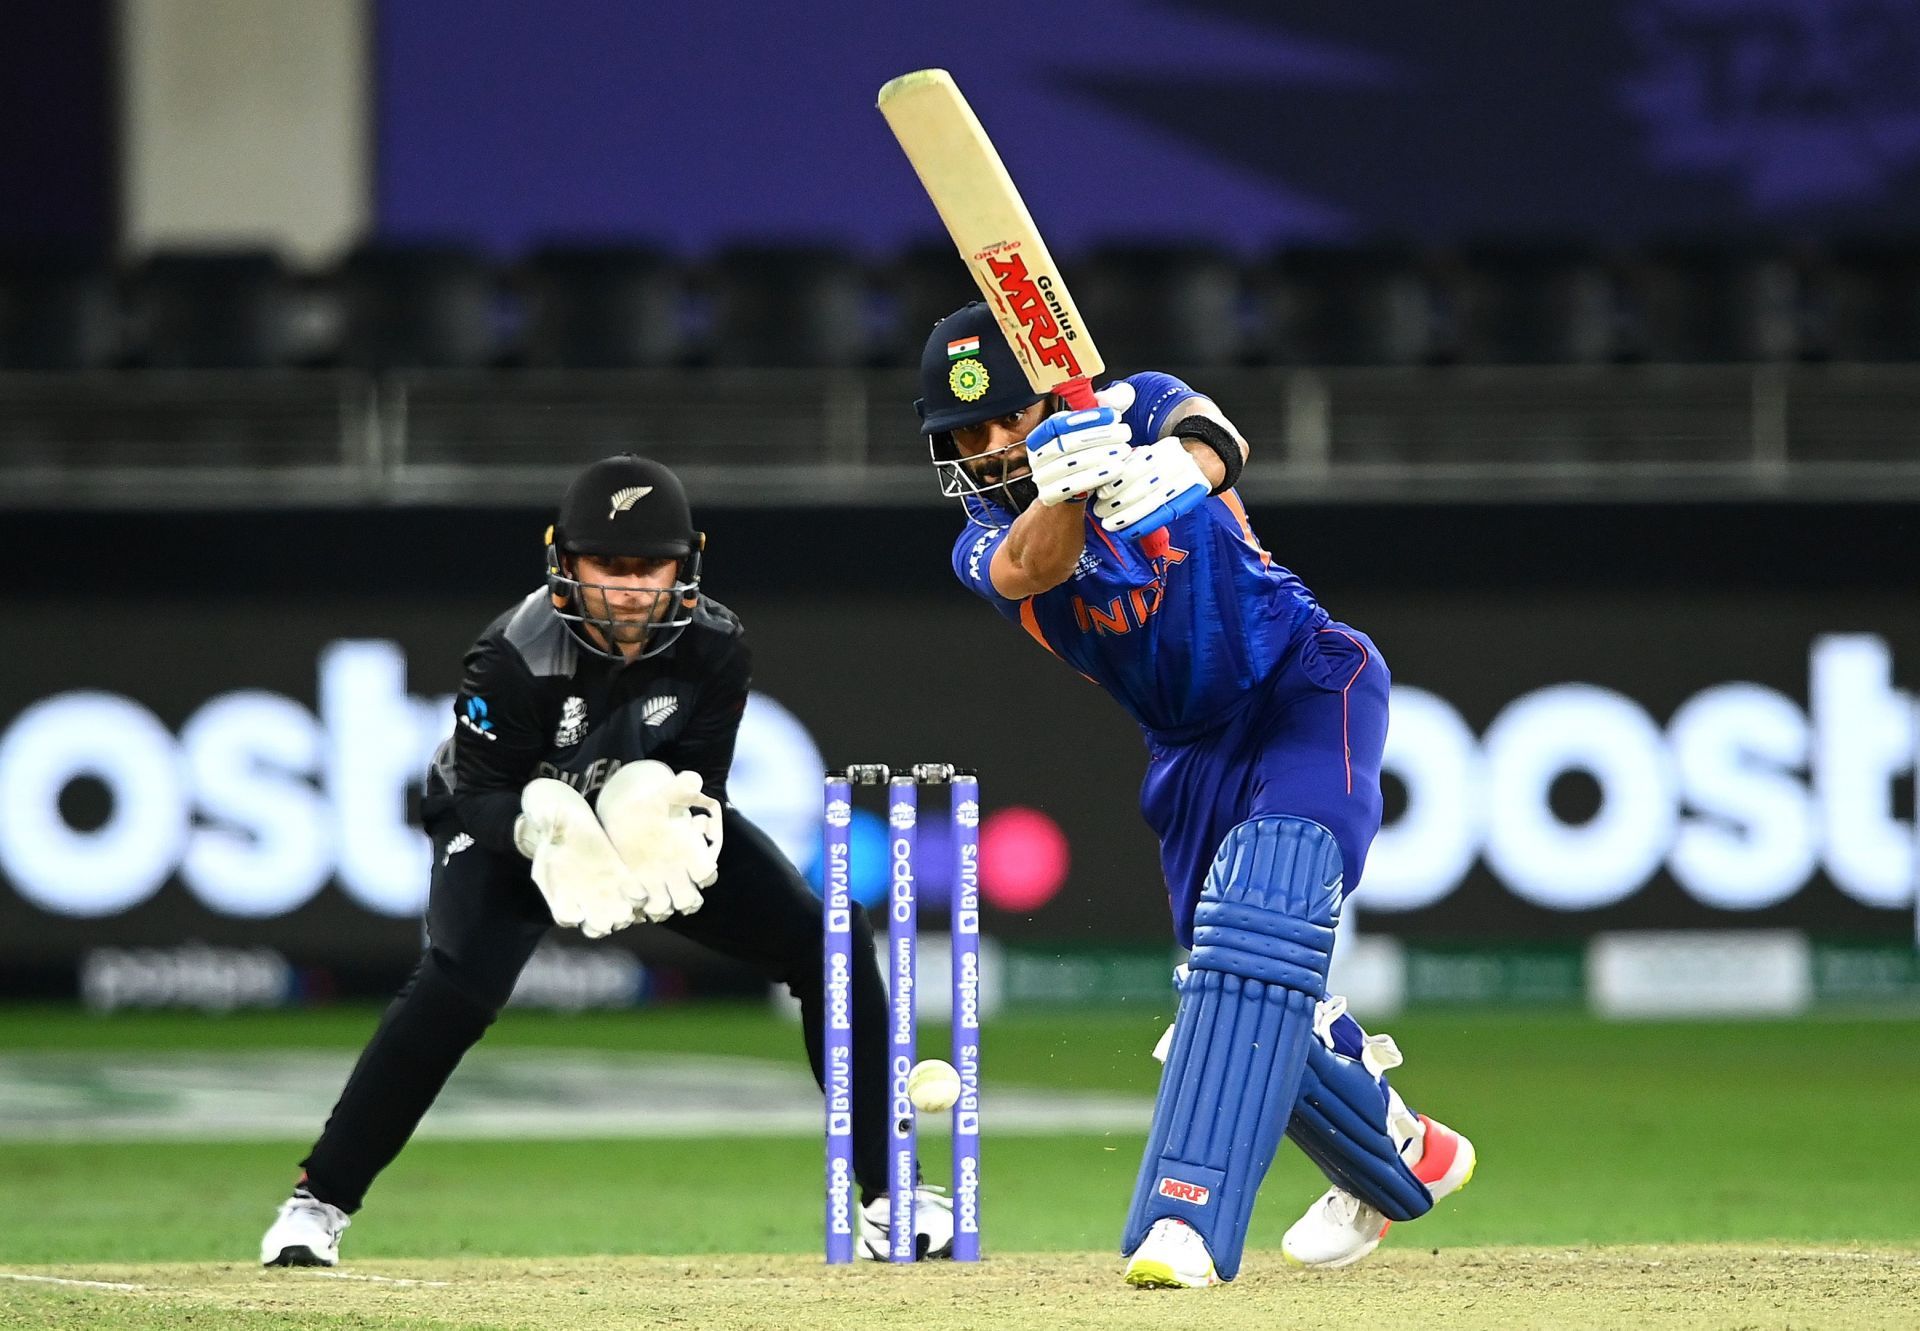 Virat Kohli is known for playing match-defining knocks if he gets his eye in.